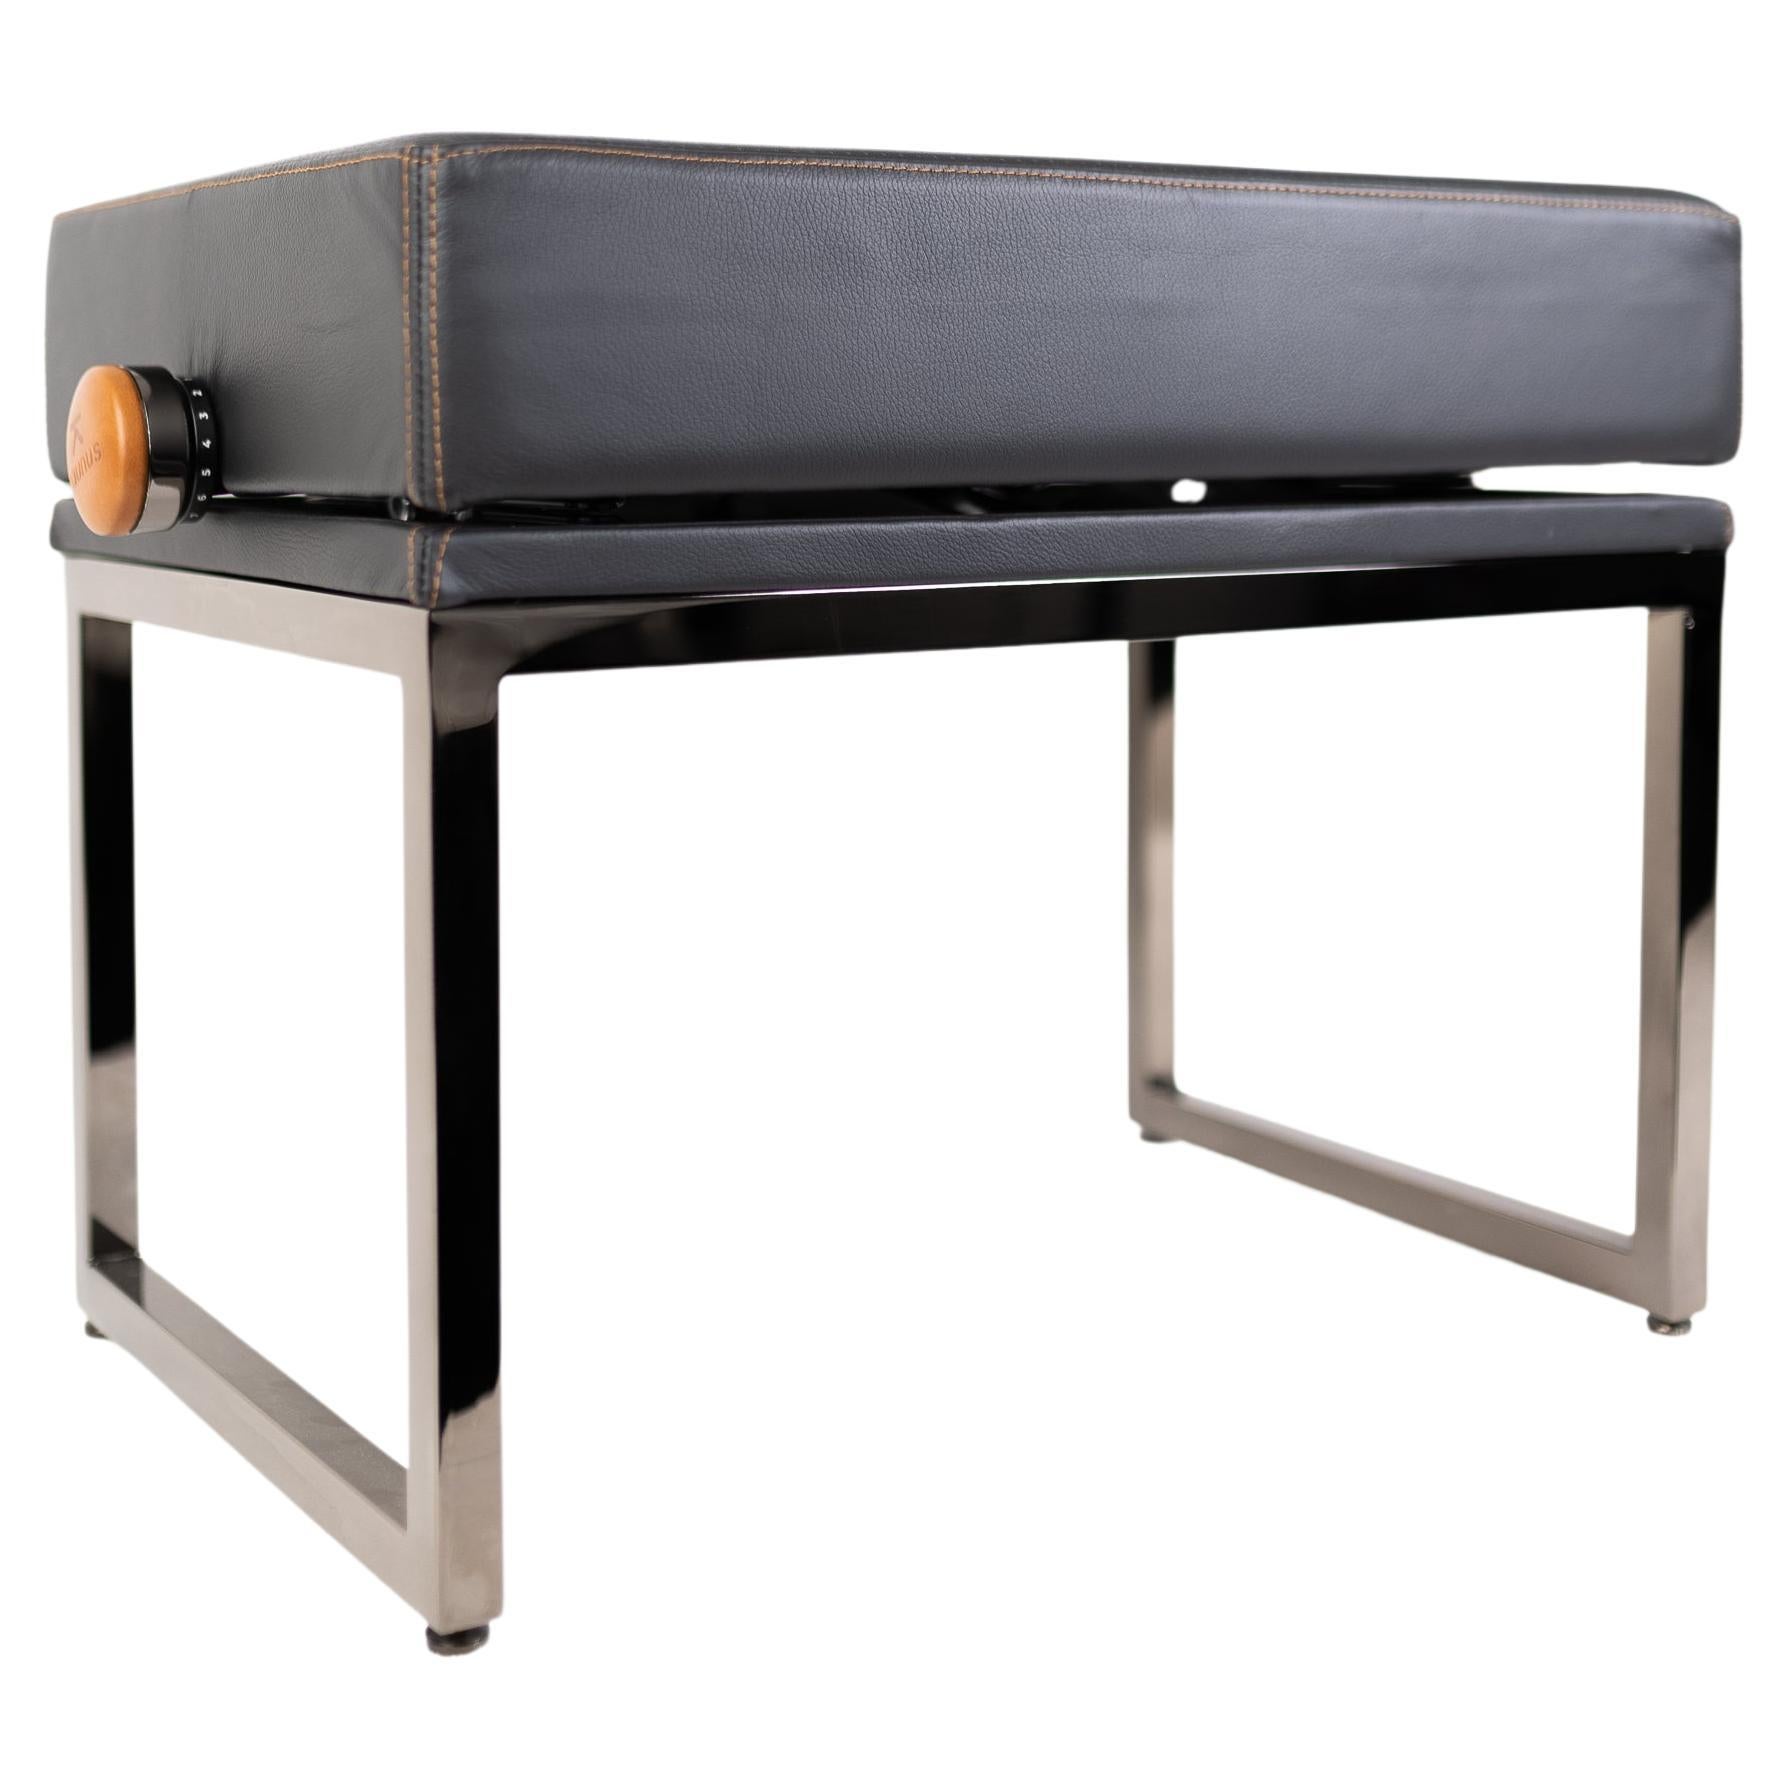 Upholstered Piano Bench Plated in black Nickel, Height Adjustable Piano Stool